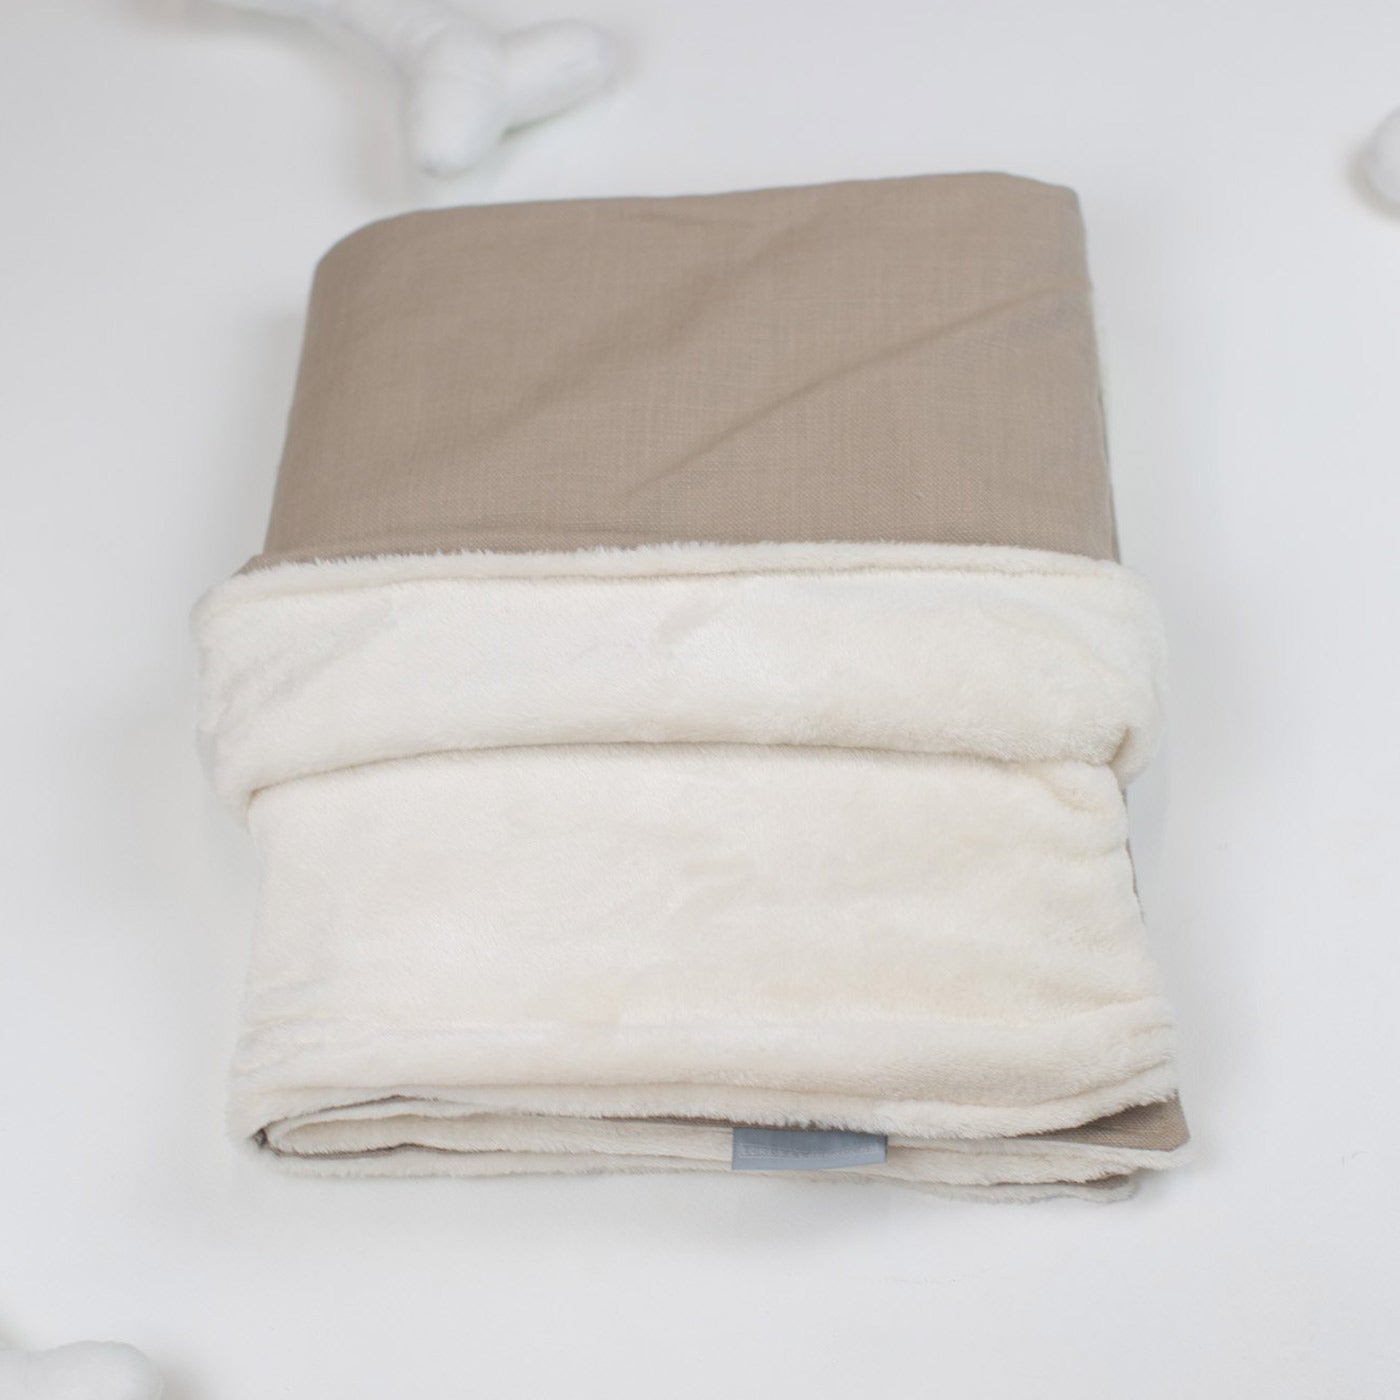 [color:savanna oatmeal] Super Soft Sherpa & Teddy Fleece Lining, Our Luxury Cat & Kitten Blanket In Stunning Savanna Oatmeal The Perfect Cat Bed Accessory! Available To Personalize at Lords & Labradors US